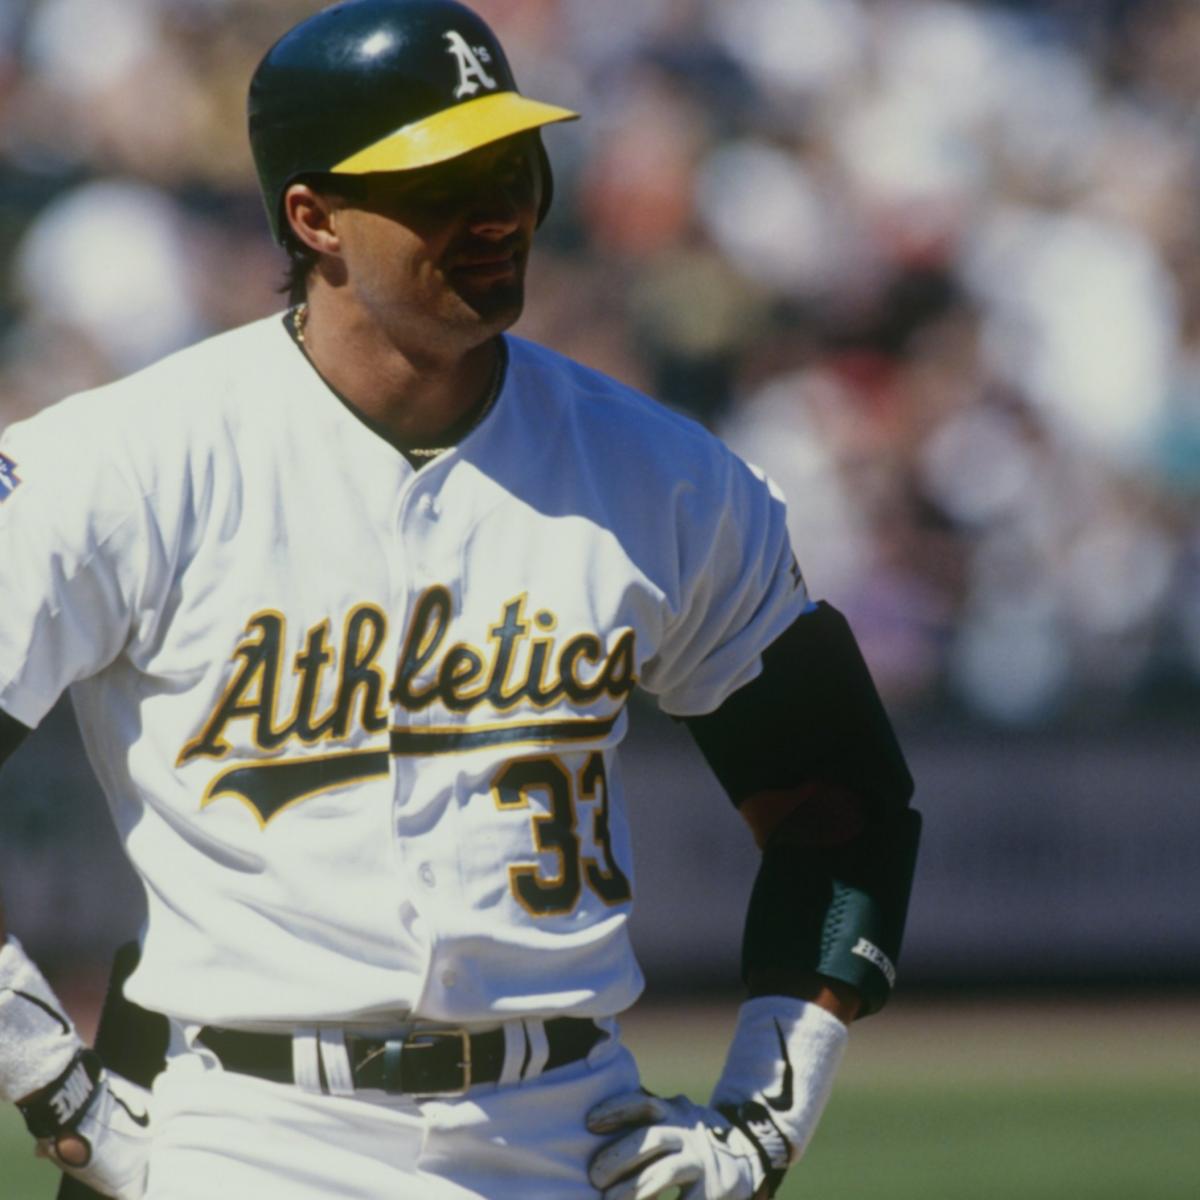 Majestic 1989 Oakland A's Athletics JOSE CANSECO World Series